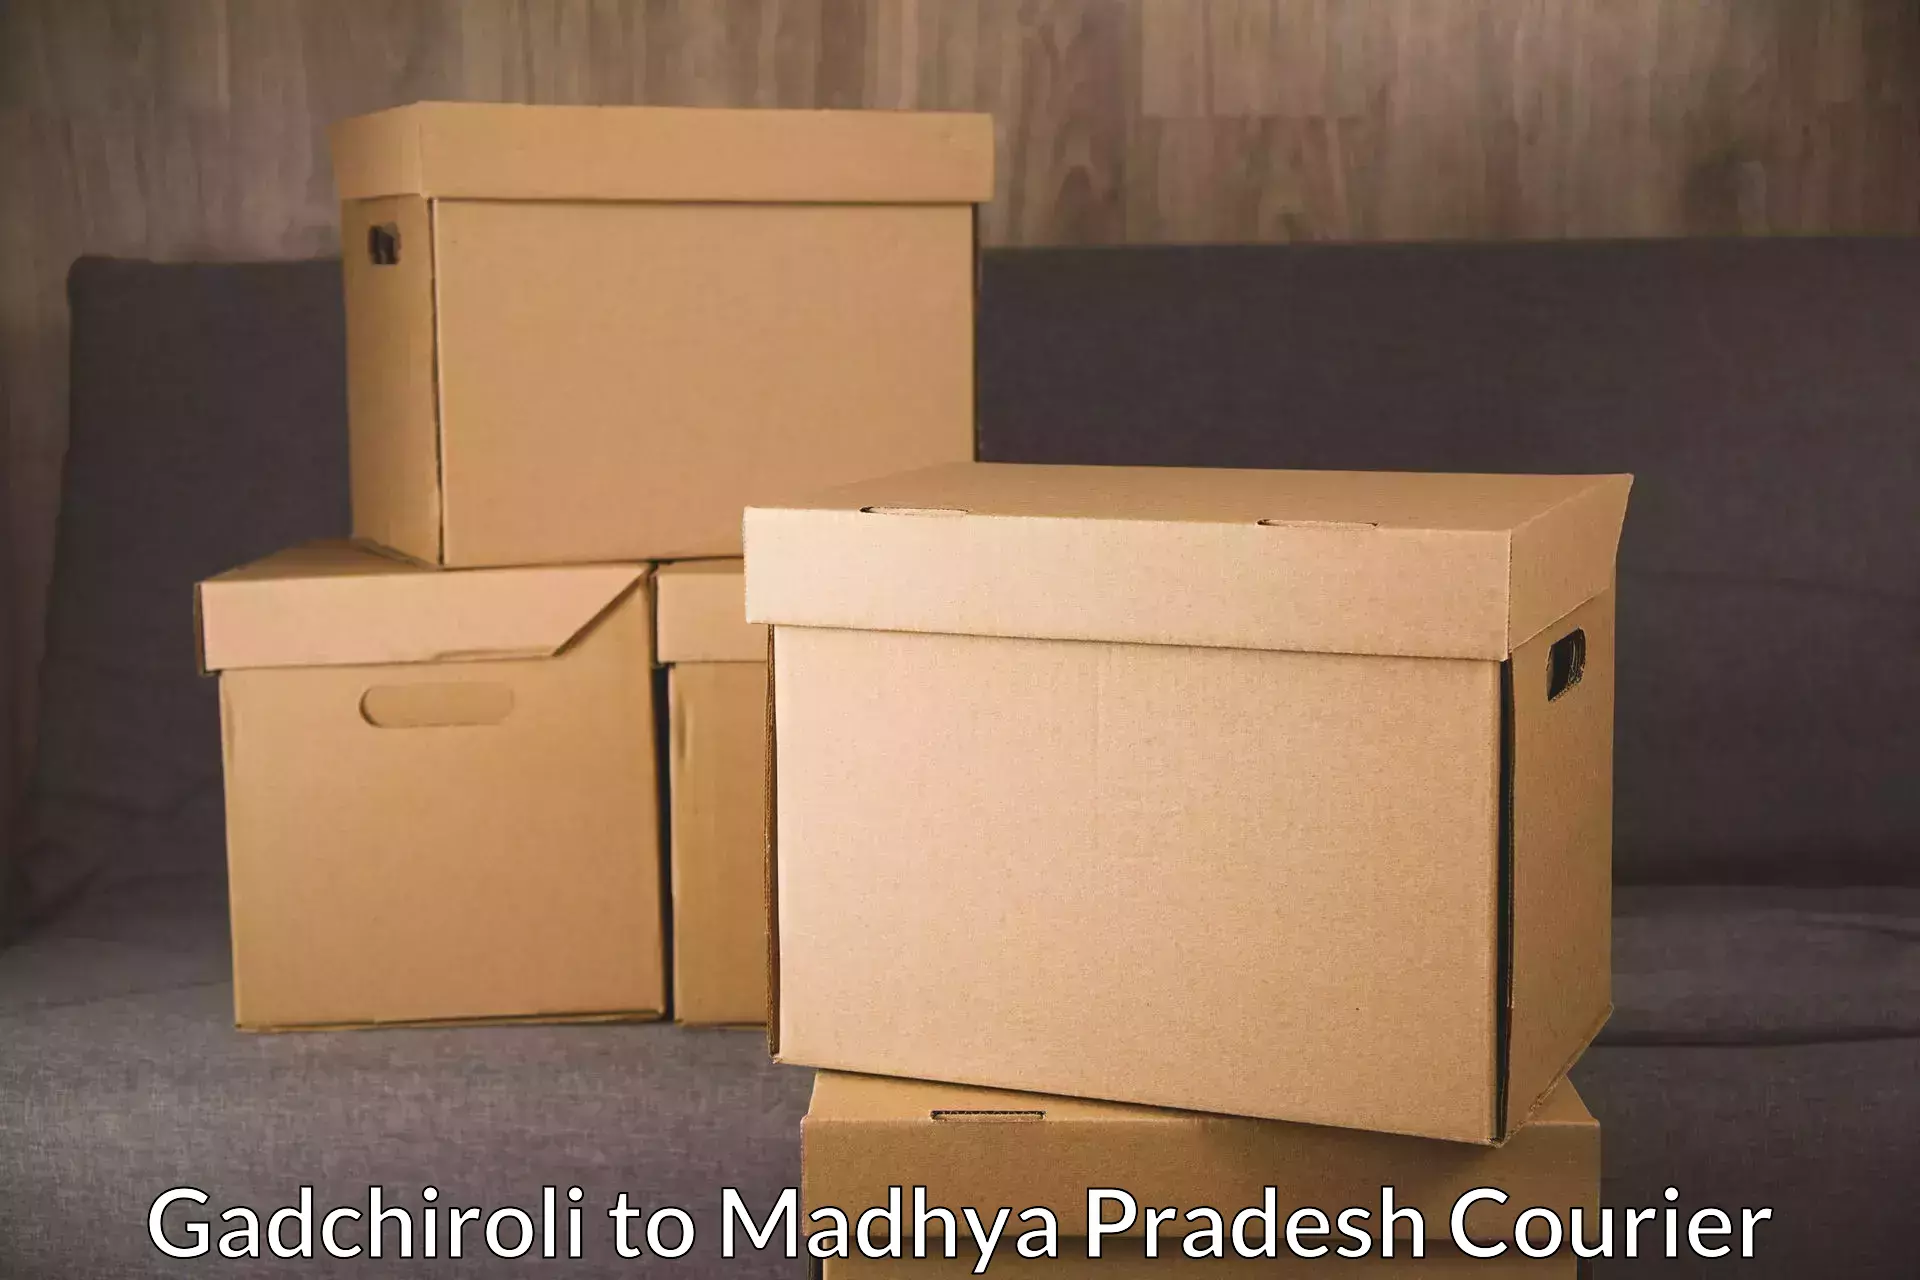 State-of-the-art courier technology Gadchiroli to Dewas